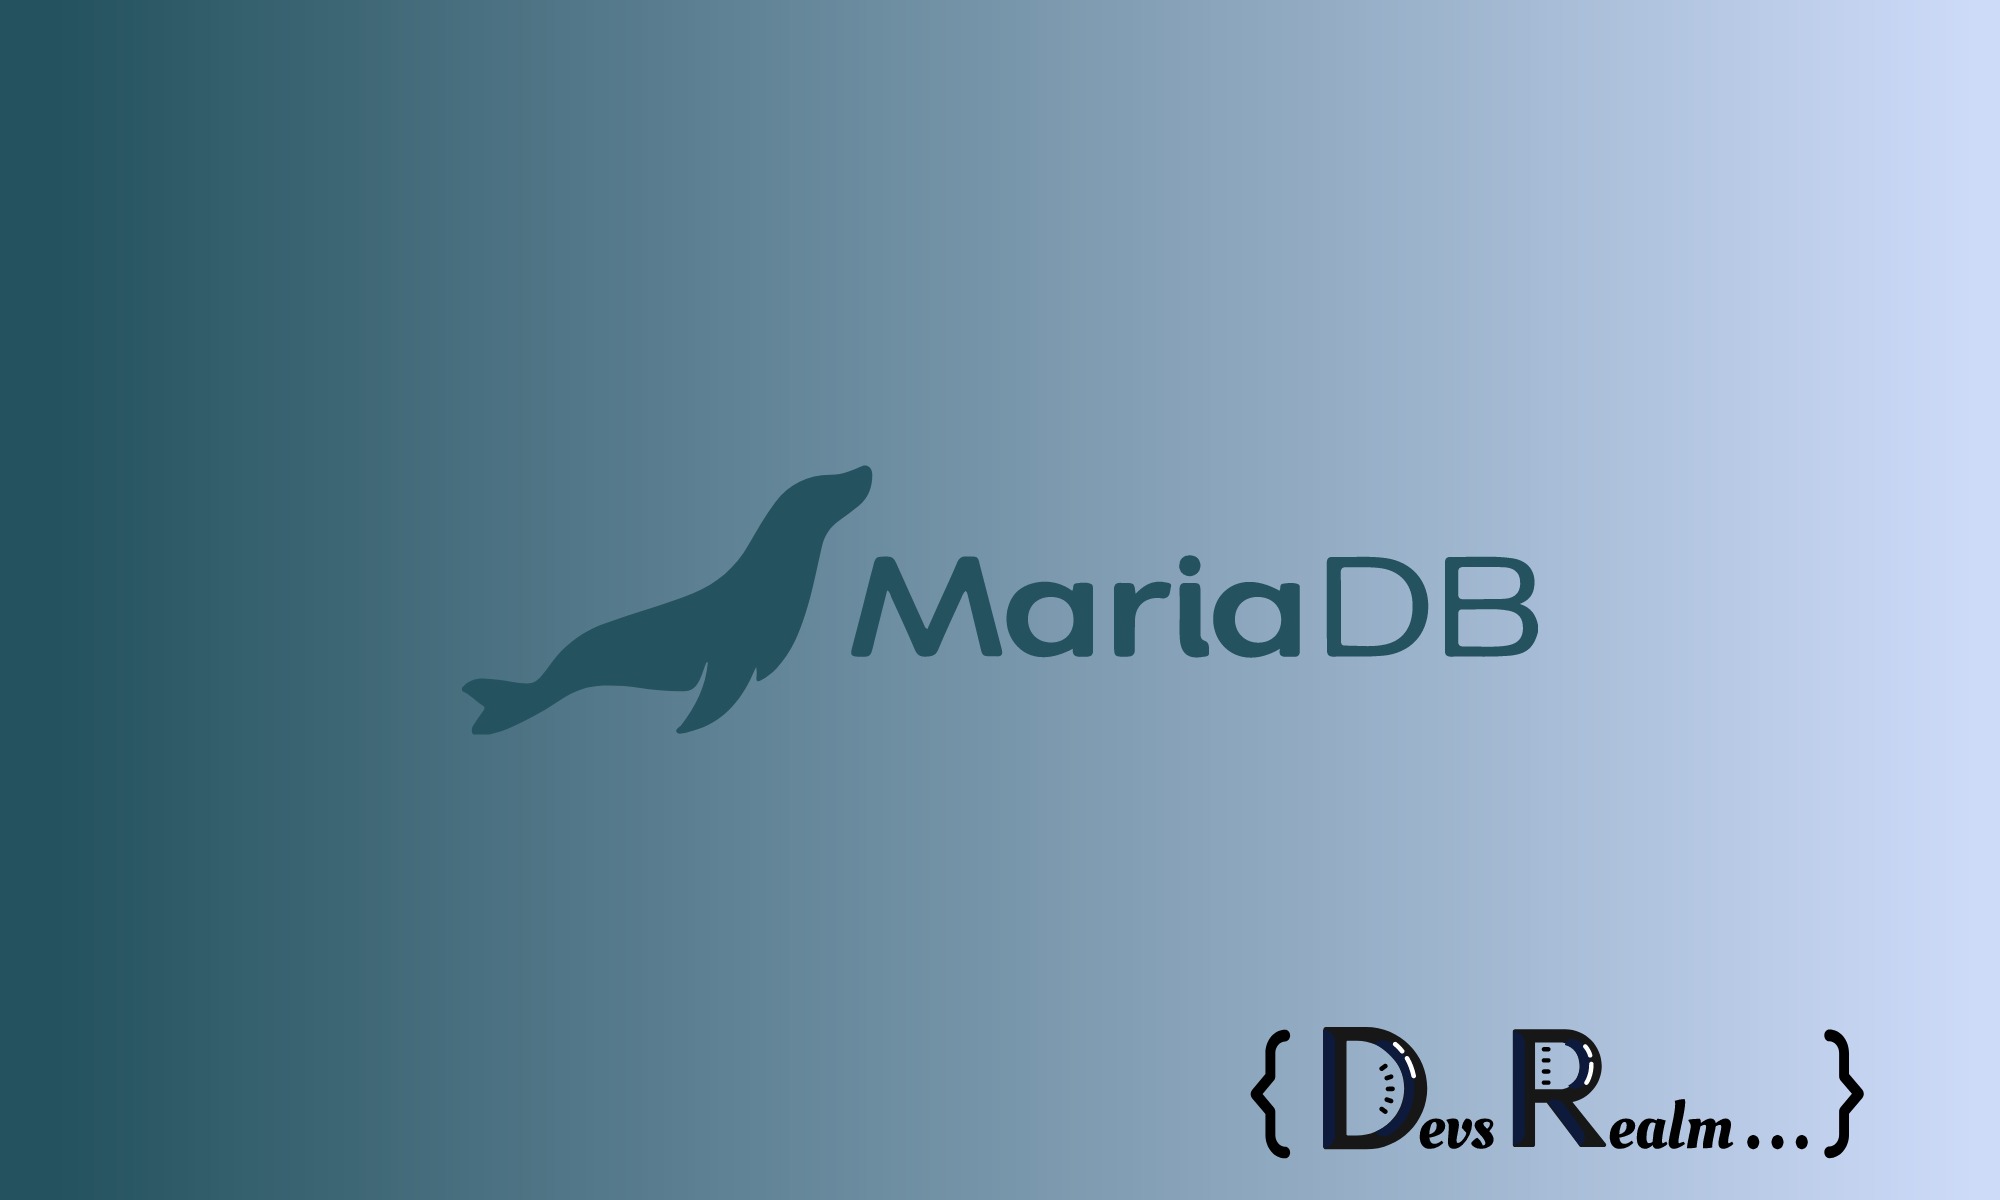 List of Functions and Practical Uses In MariaDB